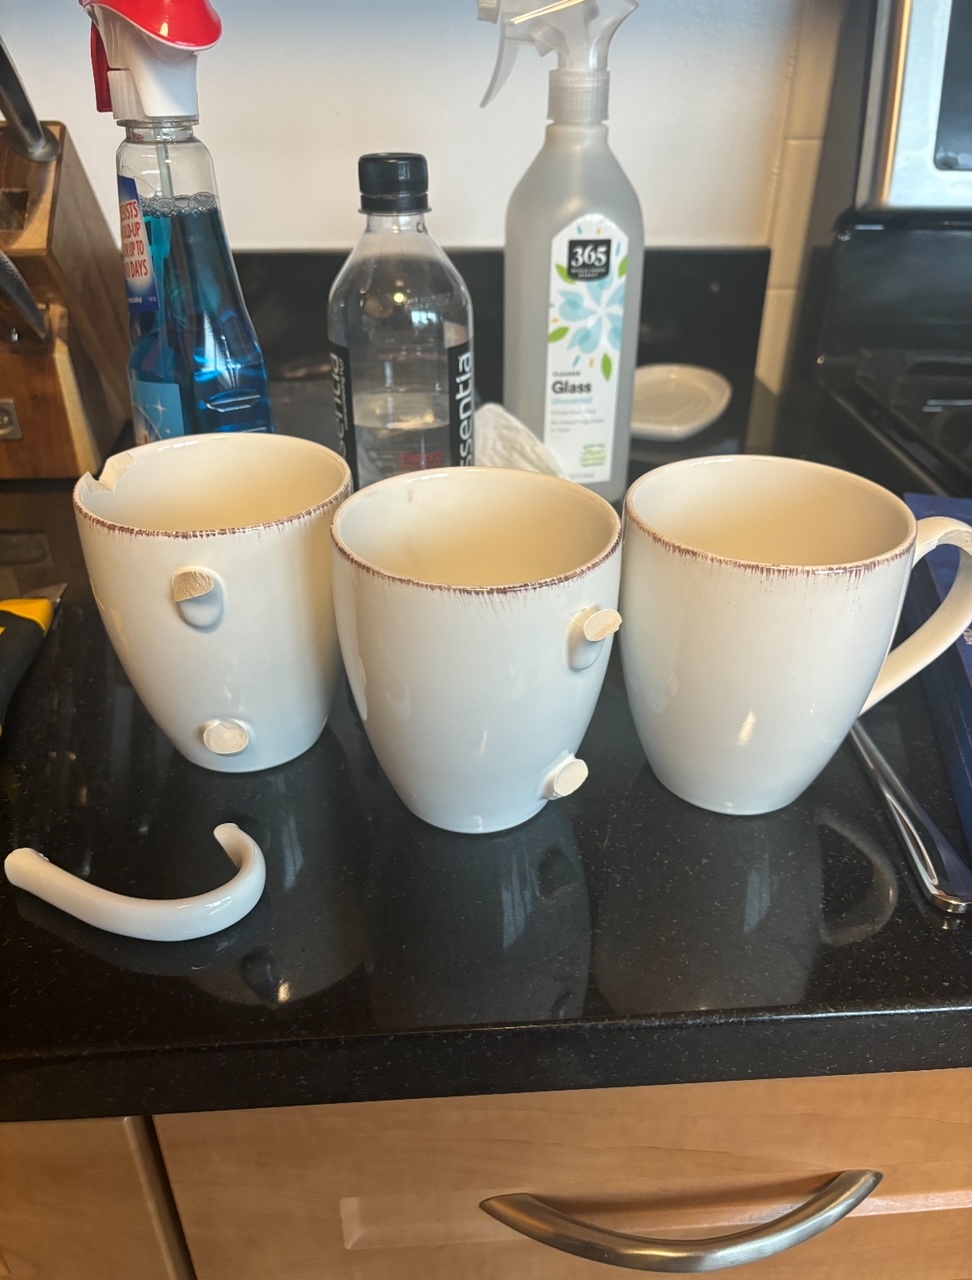 Broken cups, glasses and dishes